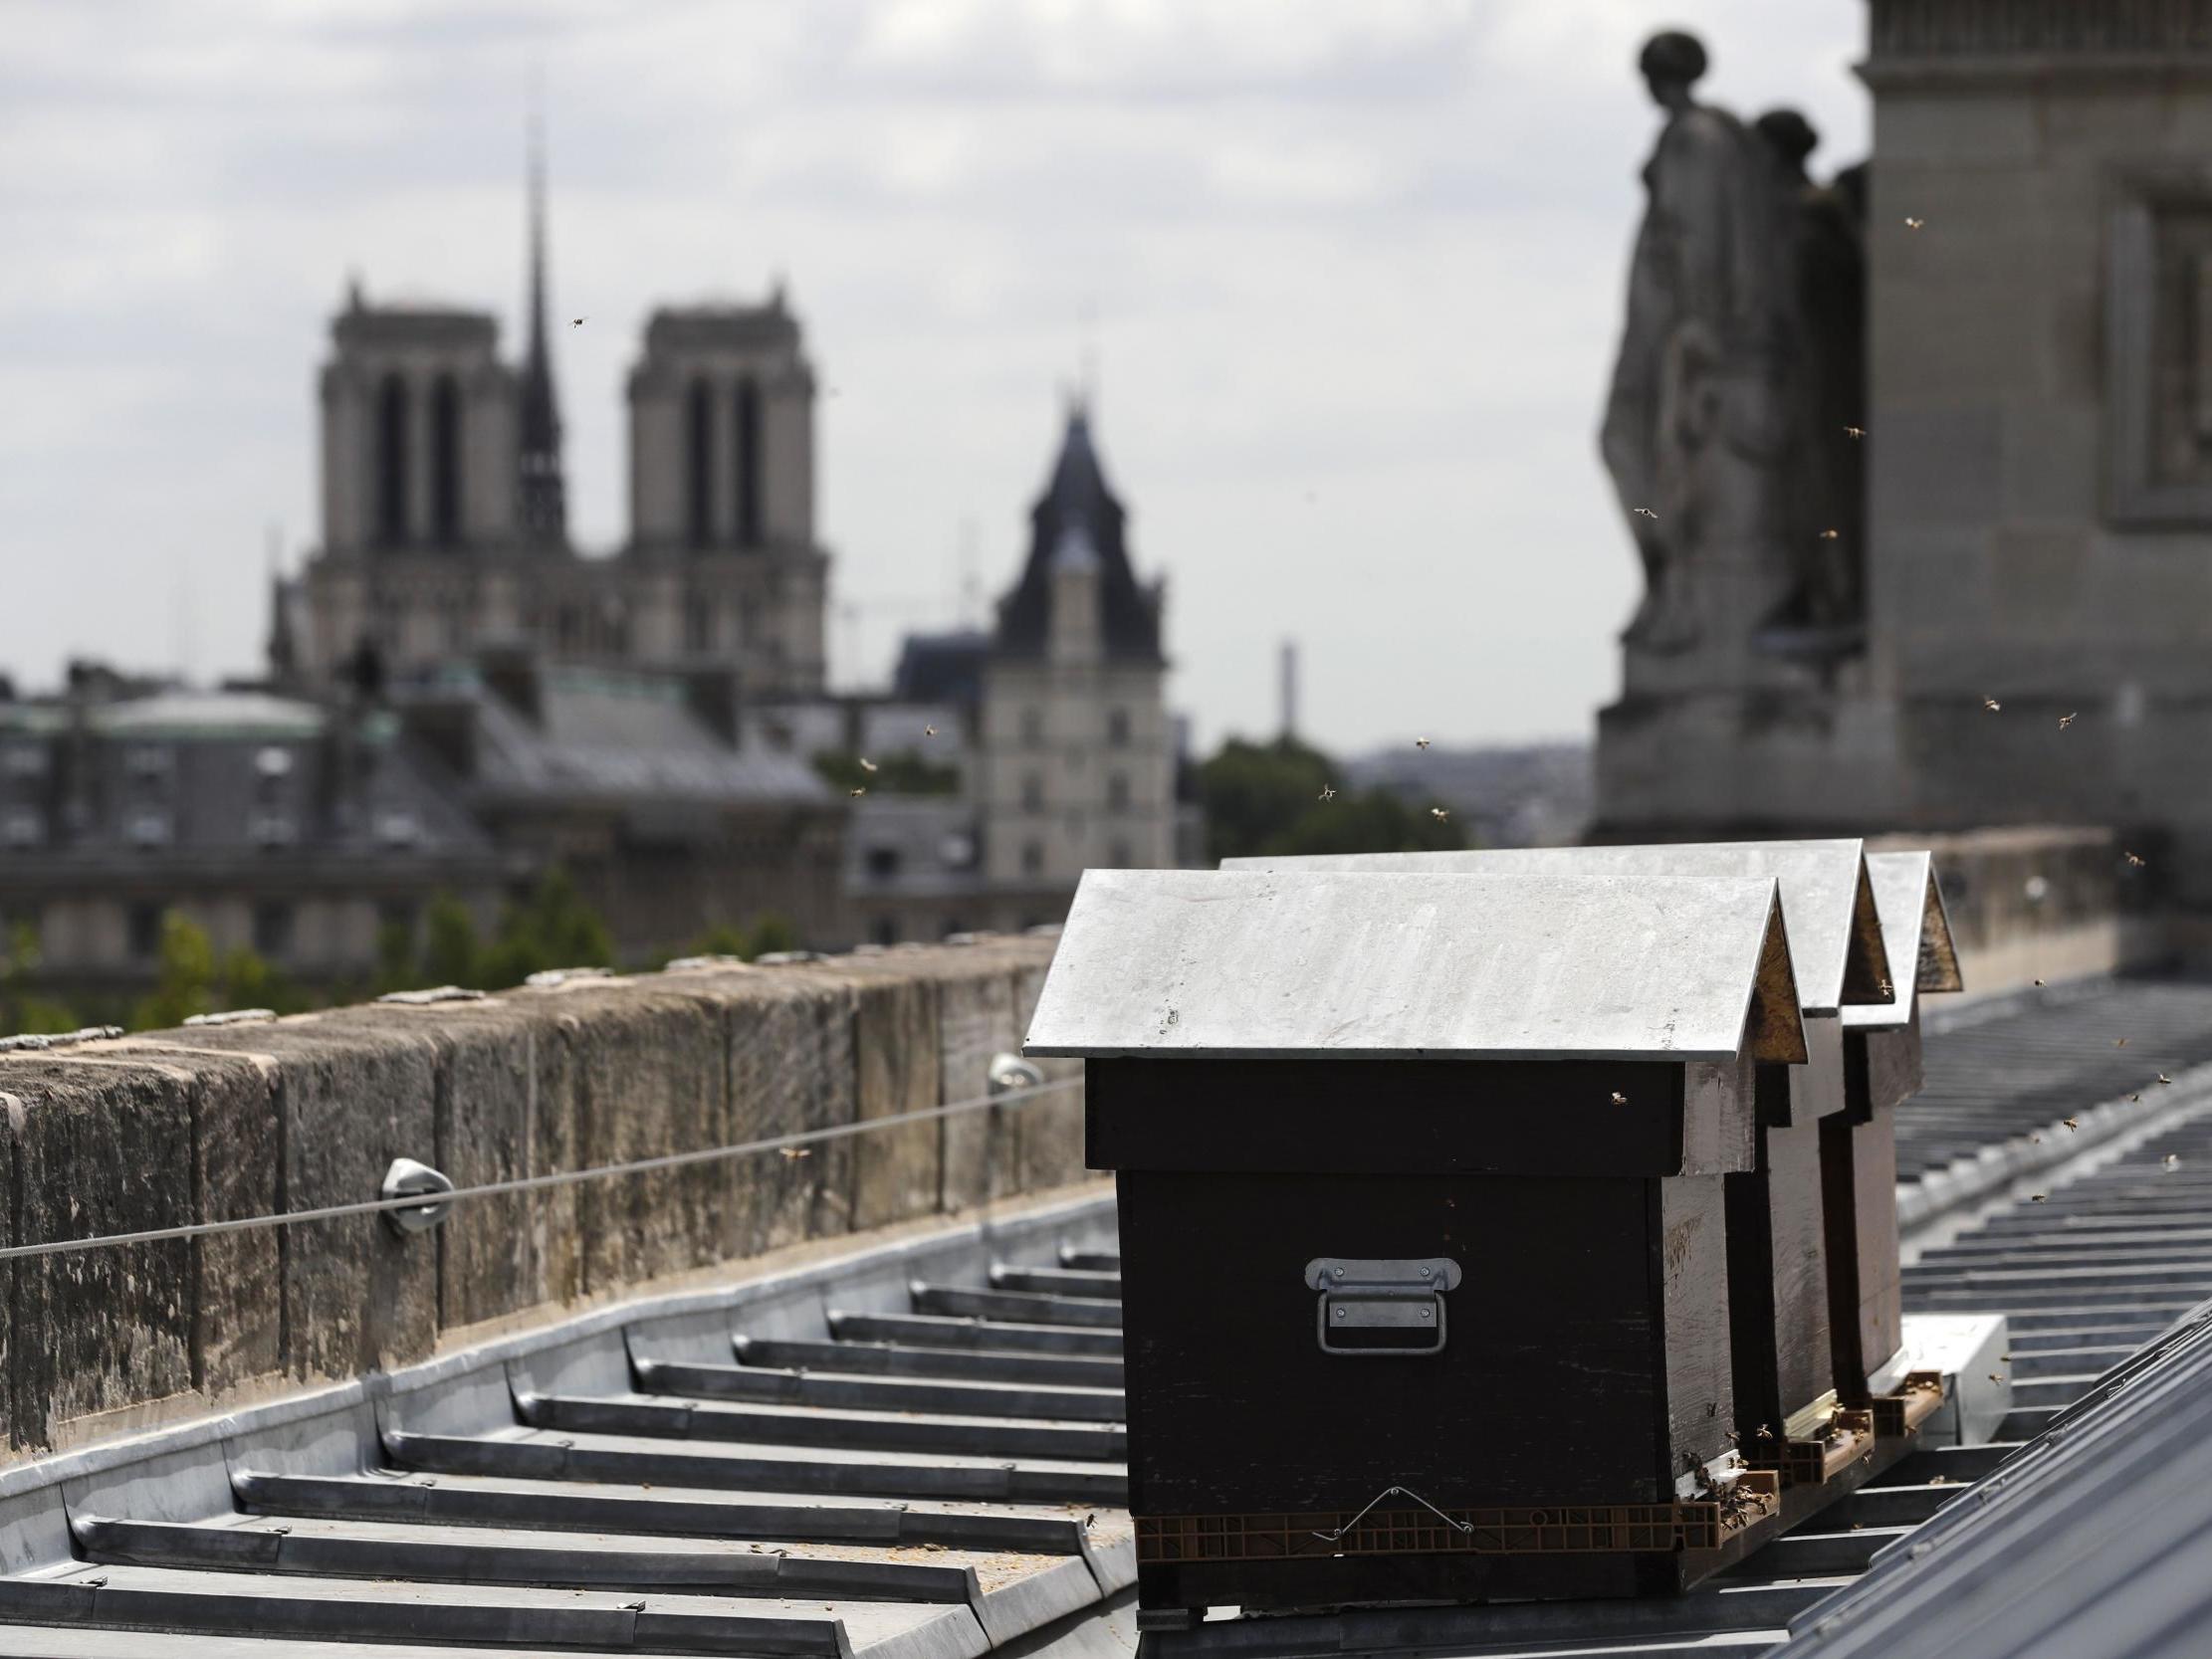 Hives are installed on the roofs of Paris buildings, including Notre Dame, to boost bee numbers